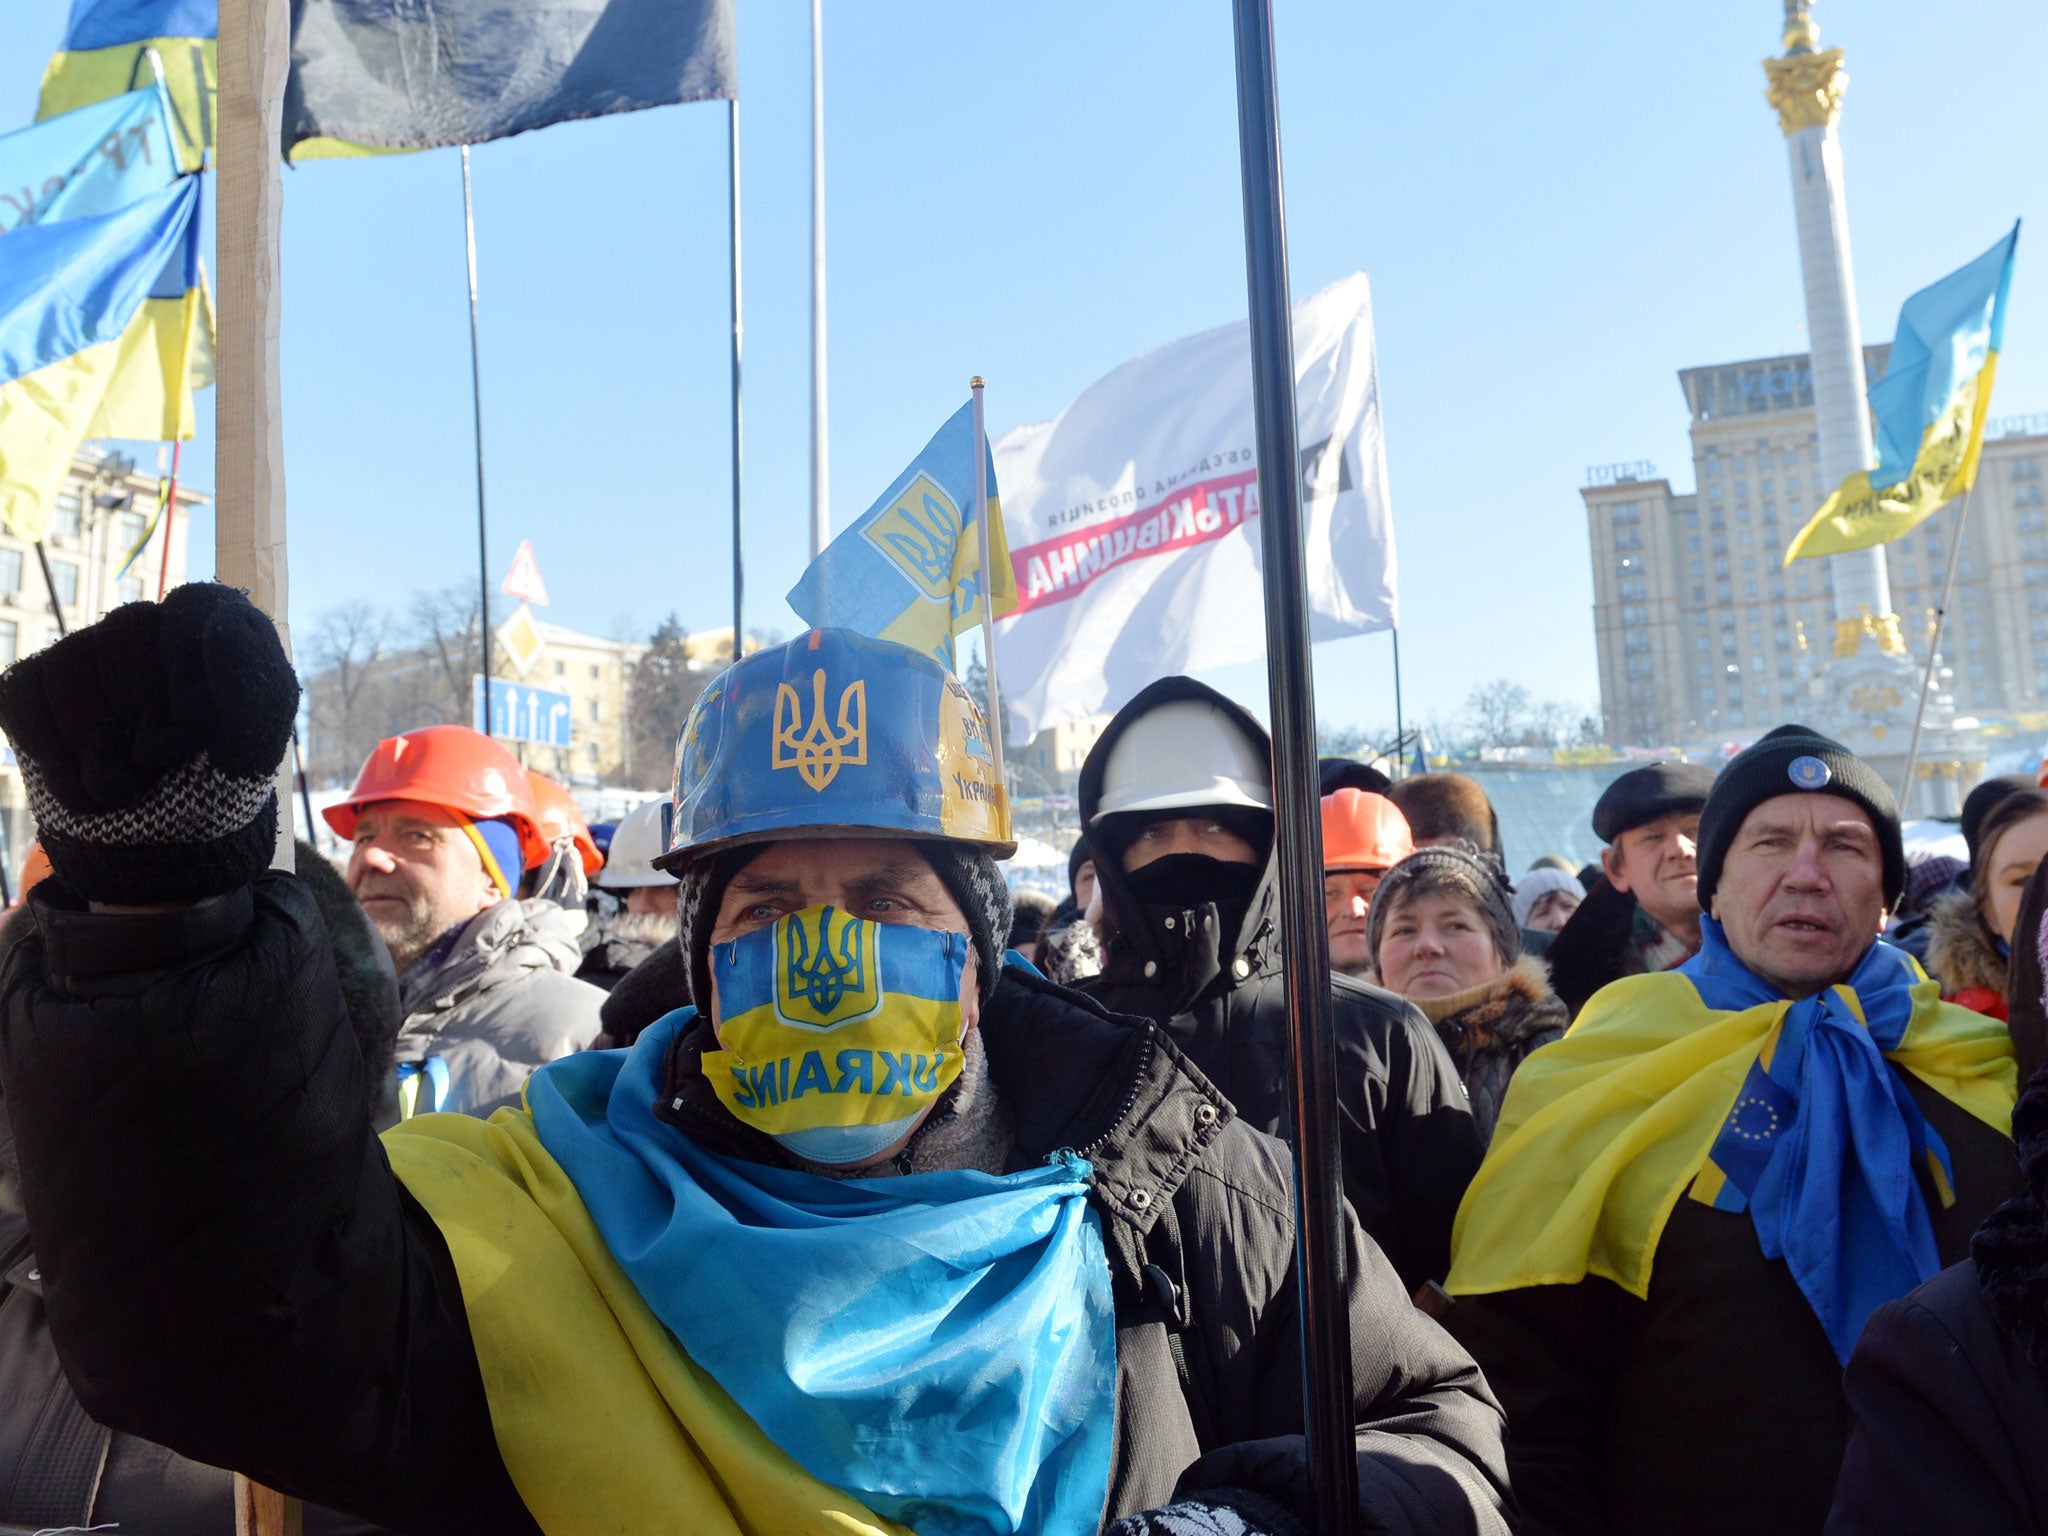 Anti-government protesters take part in a demo in Kiev on 2 February 2014. Ukraine's opposition holds a new rally amid concern about military intervention in the country's worst crisis since independence, after pledges of support from Europe and the Unite